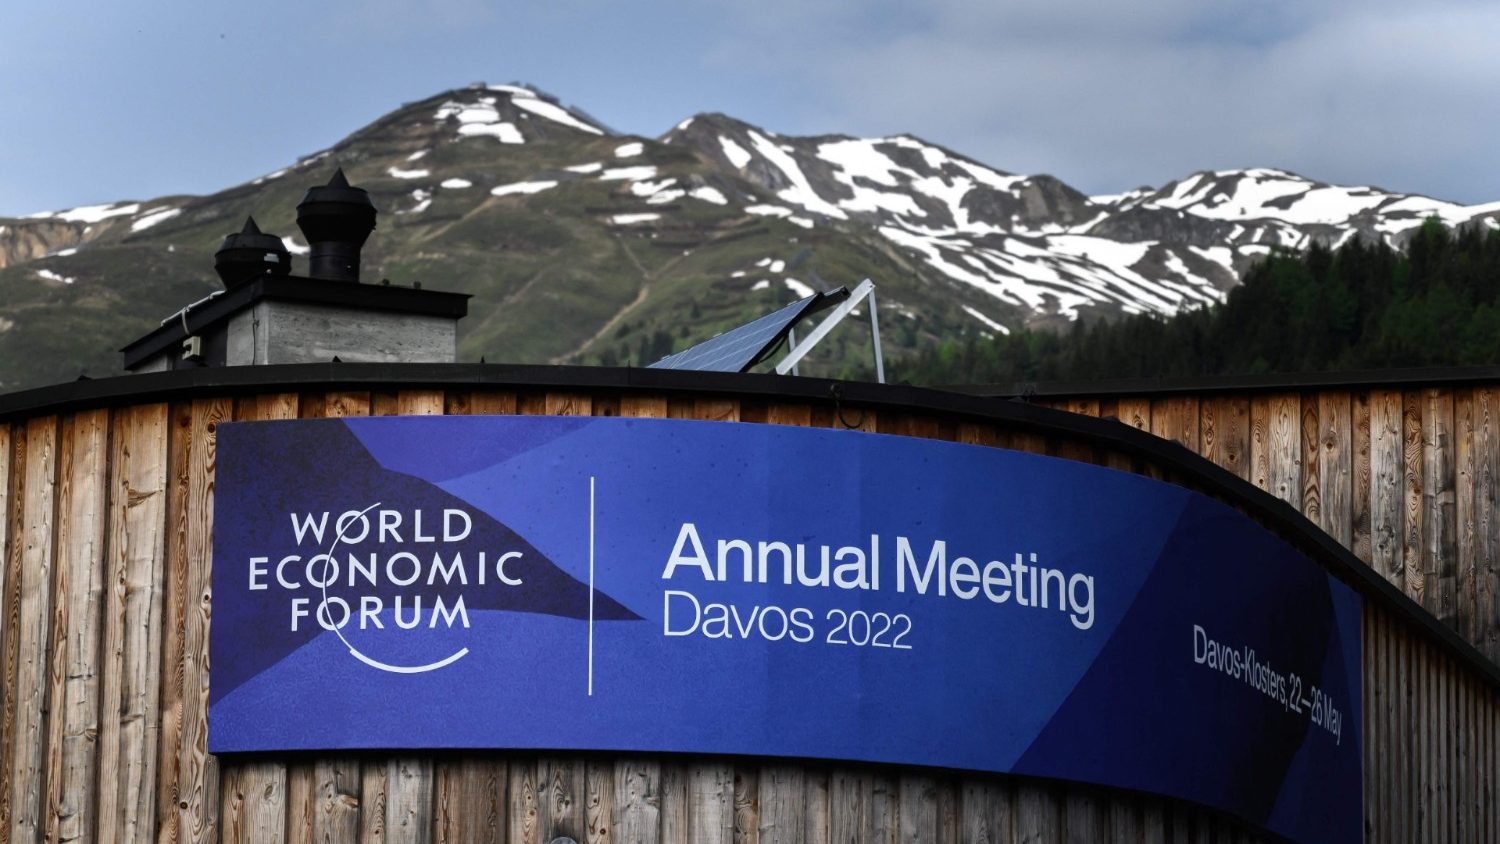 What is happening in Davos with the WEF?